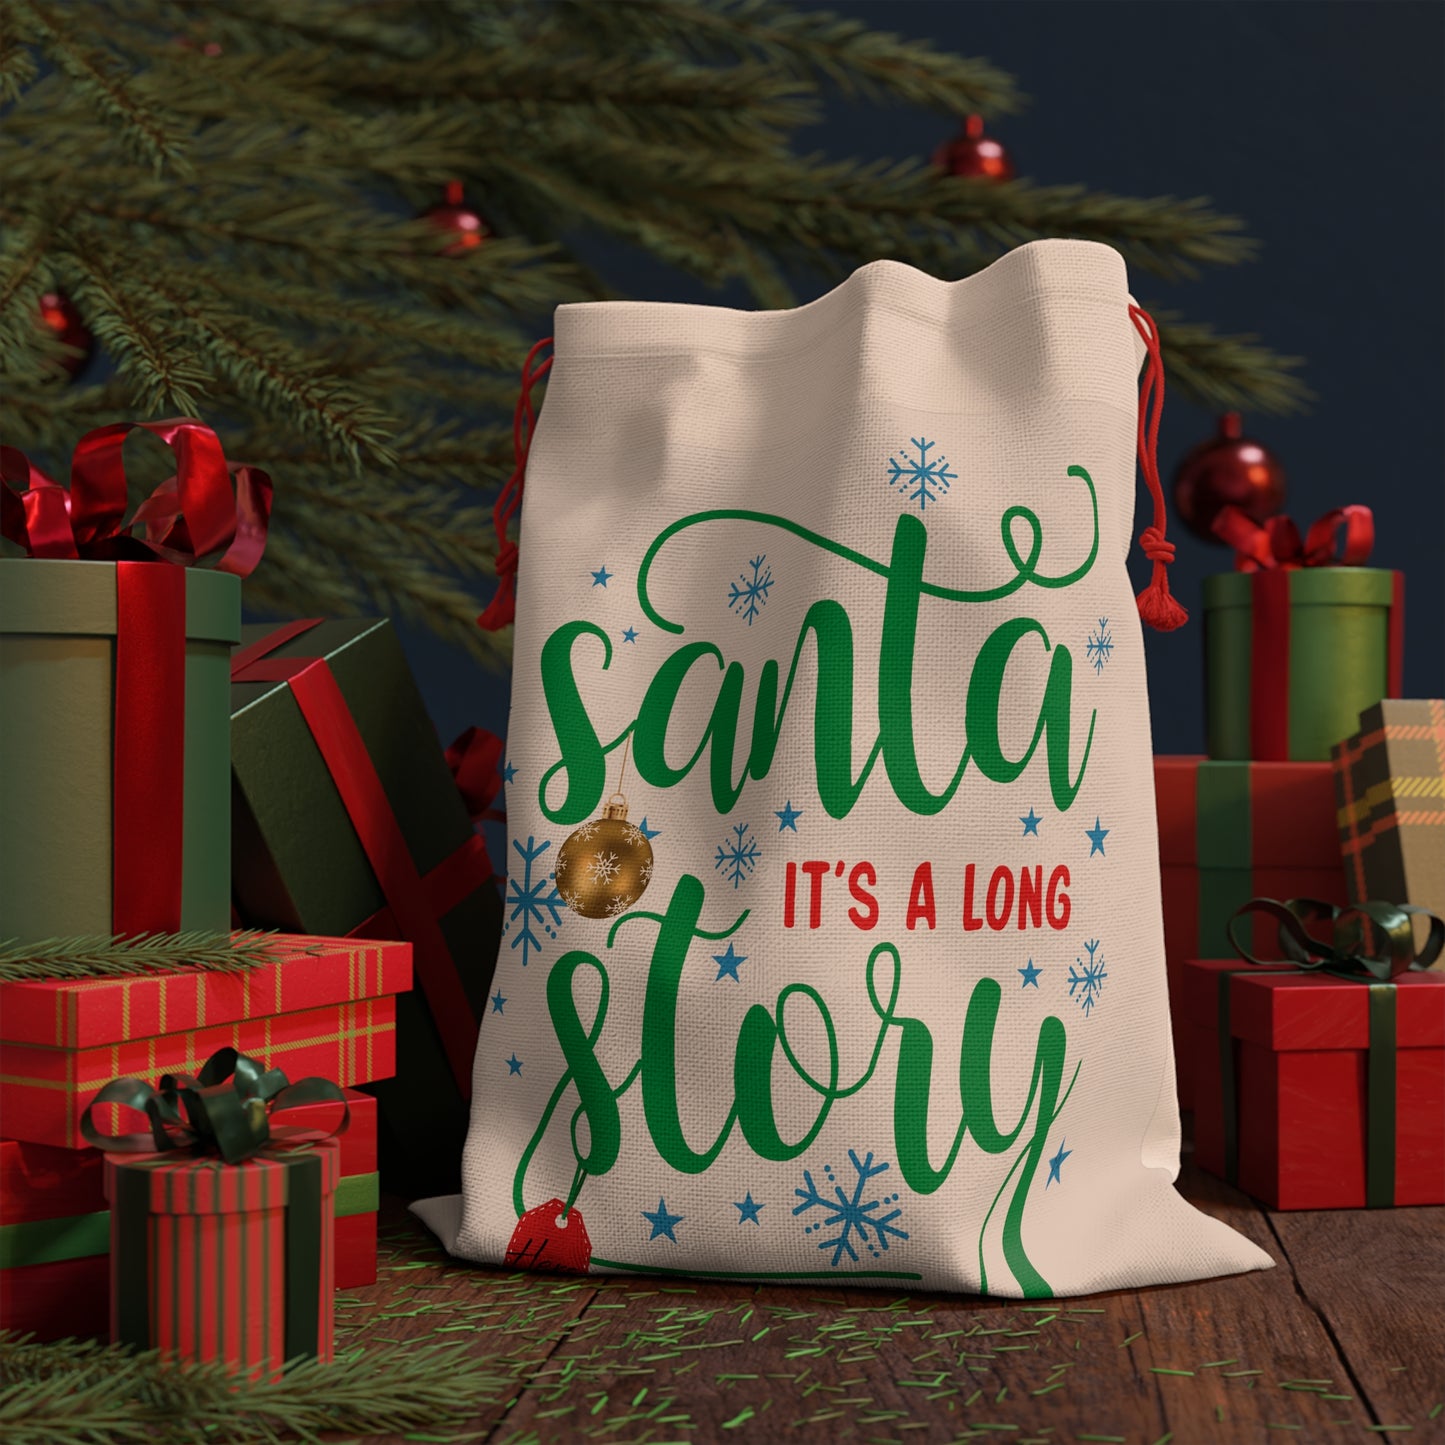 Santa, It's a Long Story... Linen Bag Great for Gifts 19.7" x 26" x .50" inches (HERS Gift Tag) Design by MII (Green Alternative to Plastics)